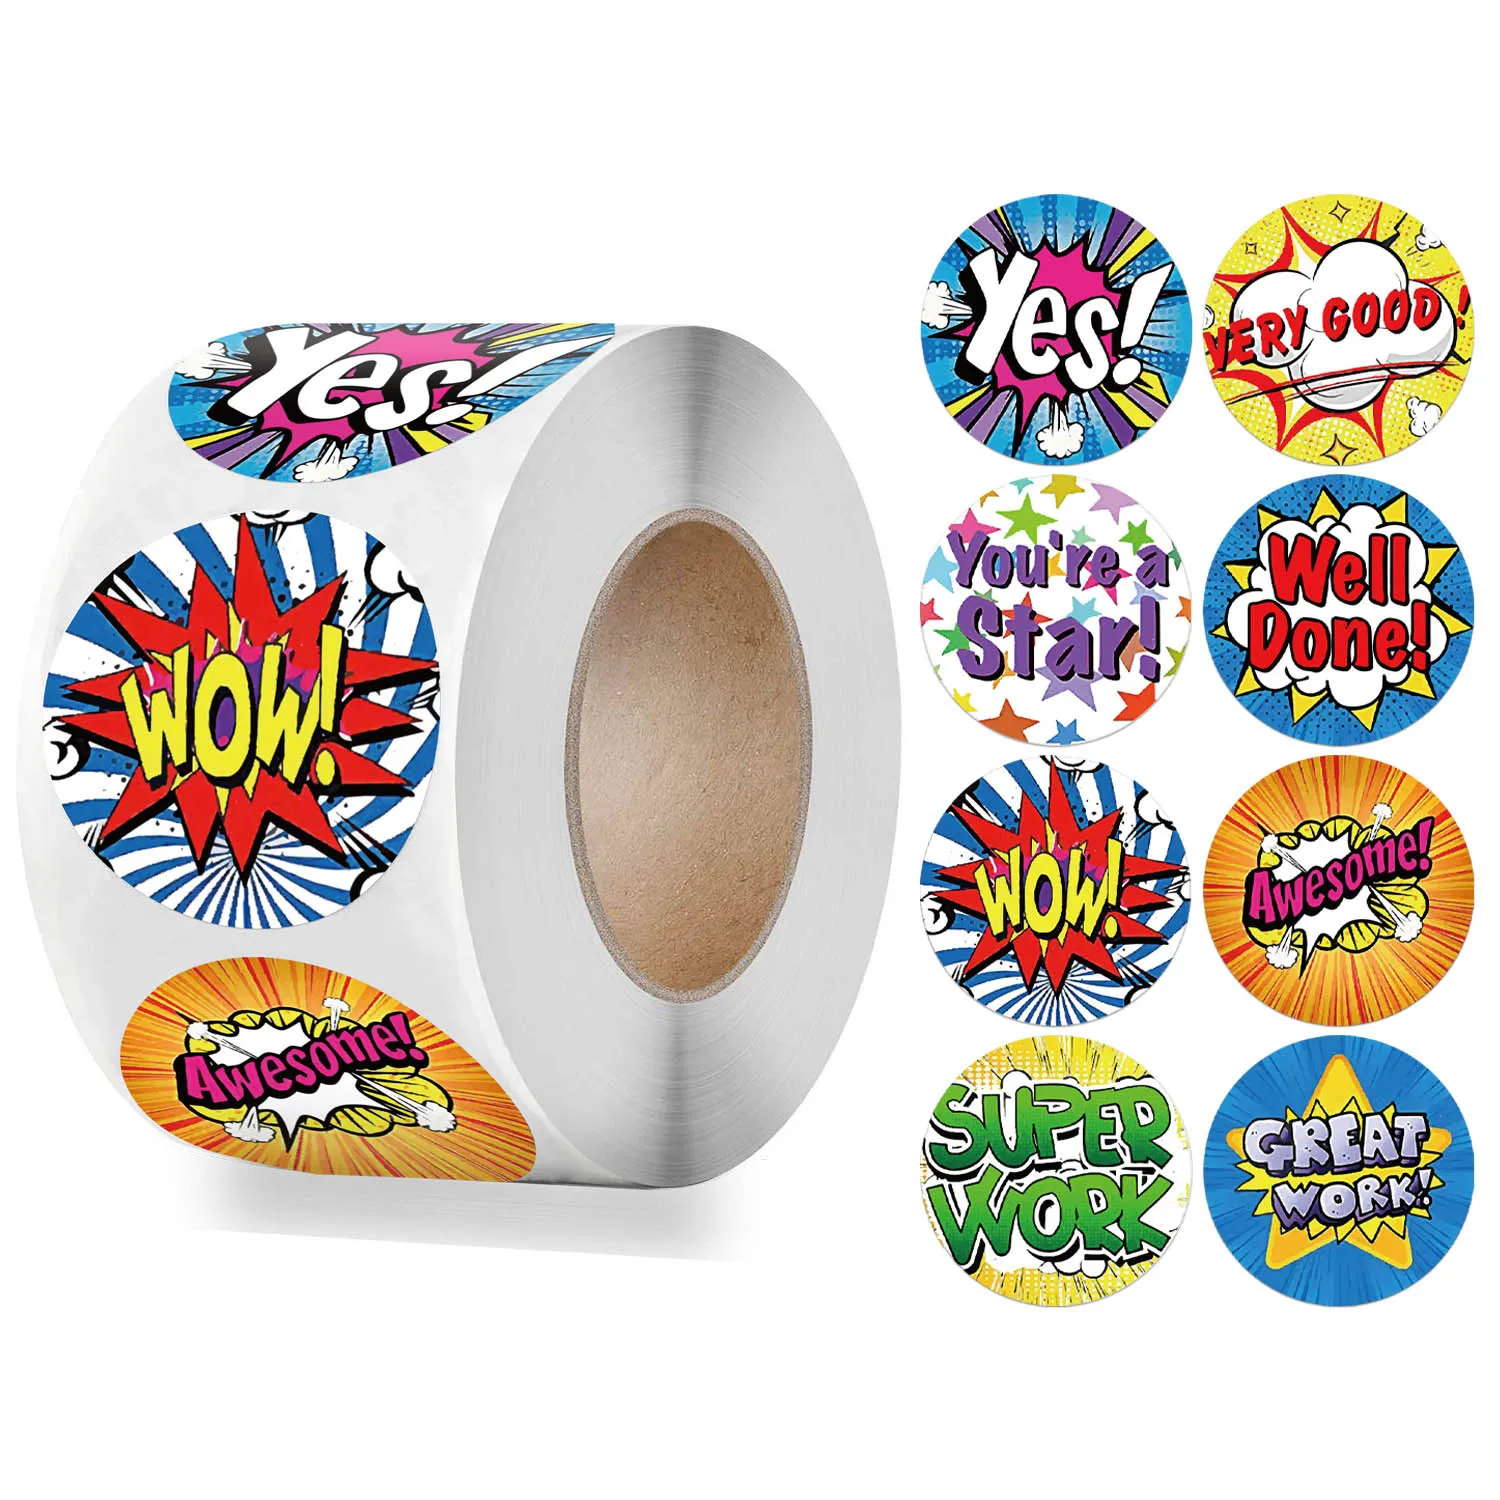 

50-500pcs Cute Reward Stickers Roll with Word Motivational Stickers for School Teacher Kids Student Stationery Stickers Kids